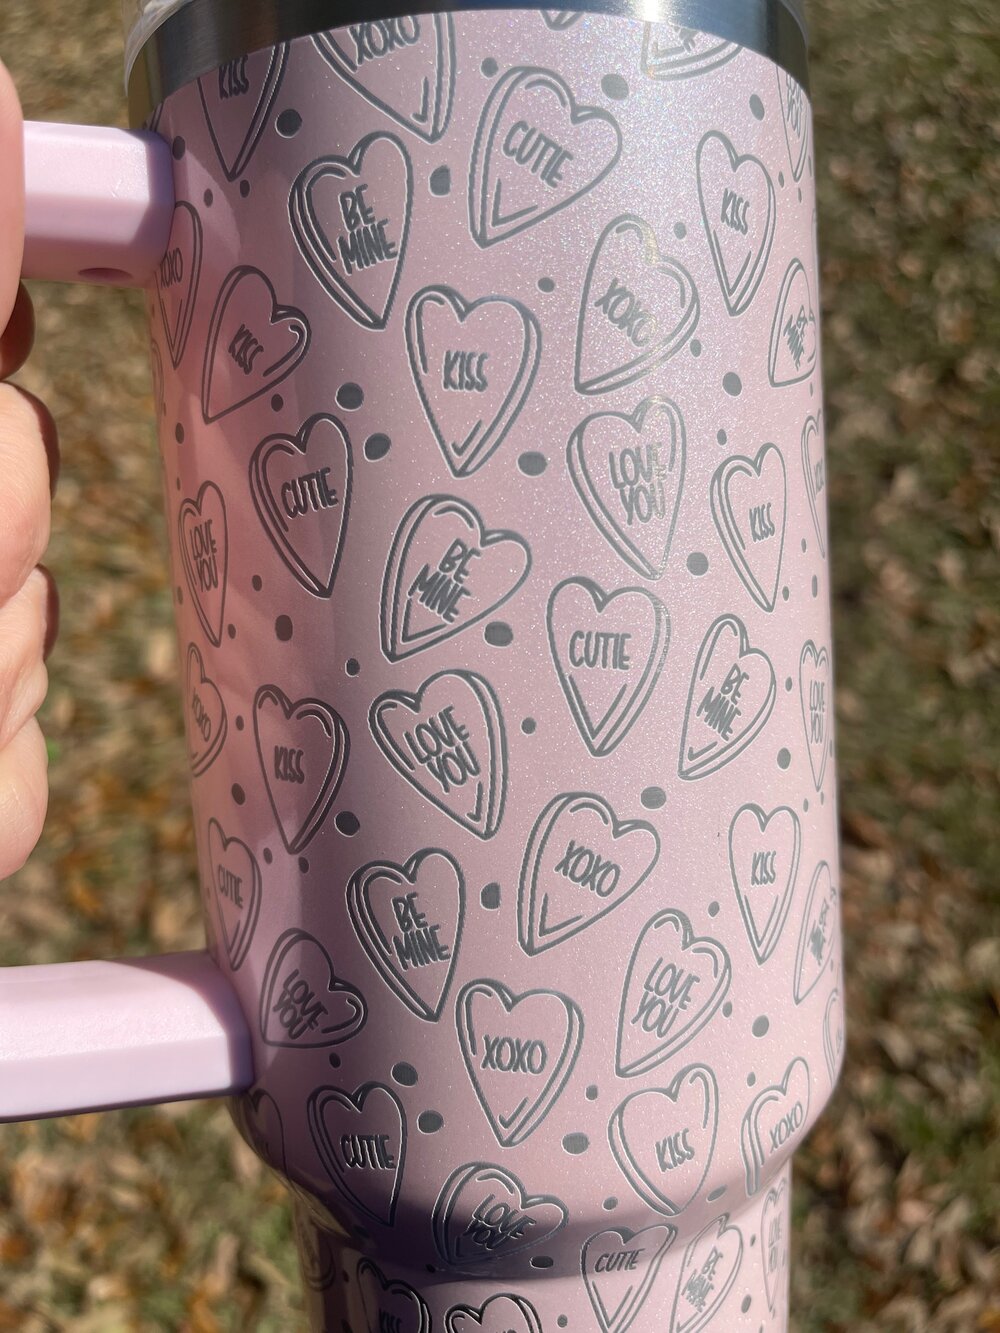 40oz tumbler w/ handle and Conversation Hearts engraved. — That Laser Lady